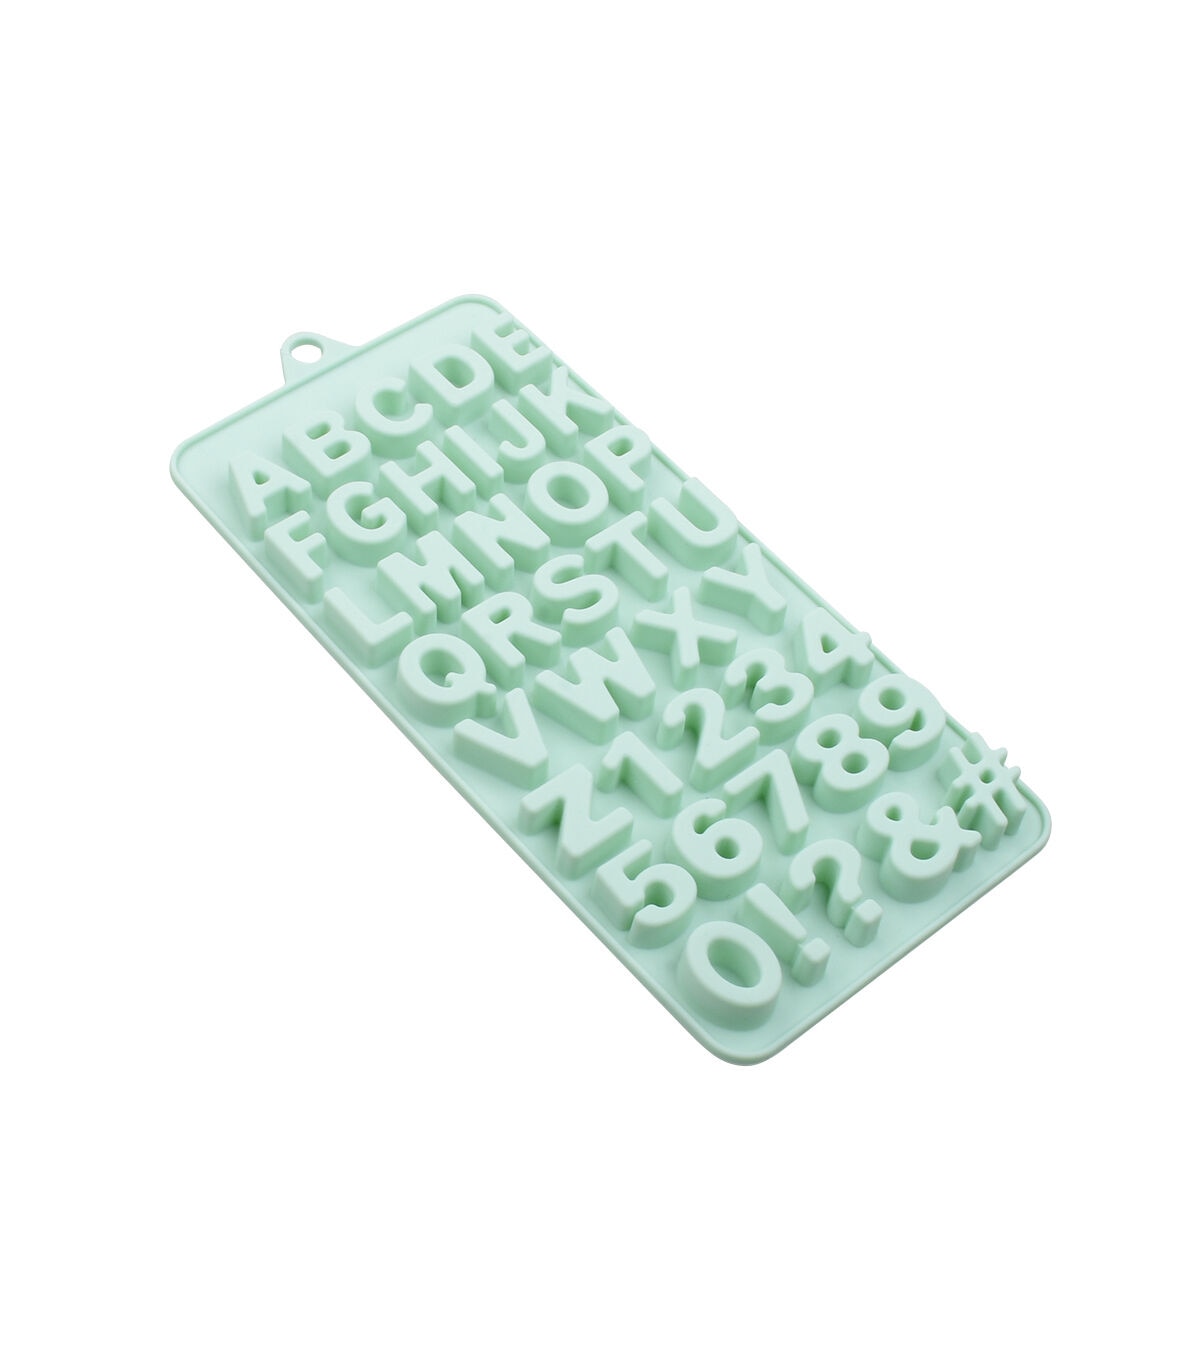 Stir 4 x 9 Silicone Letters & Numbers Candy Mold - Molds - Baking & Kitchen